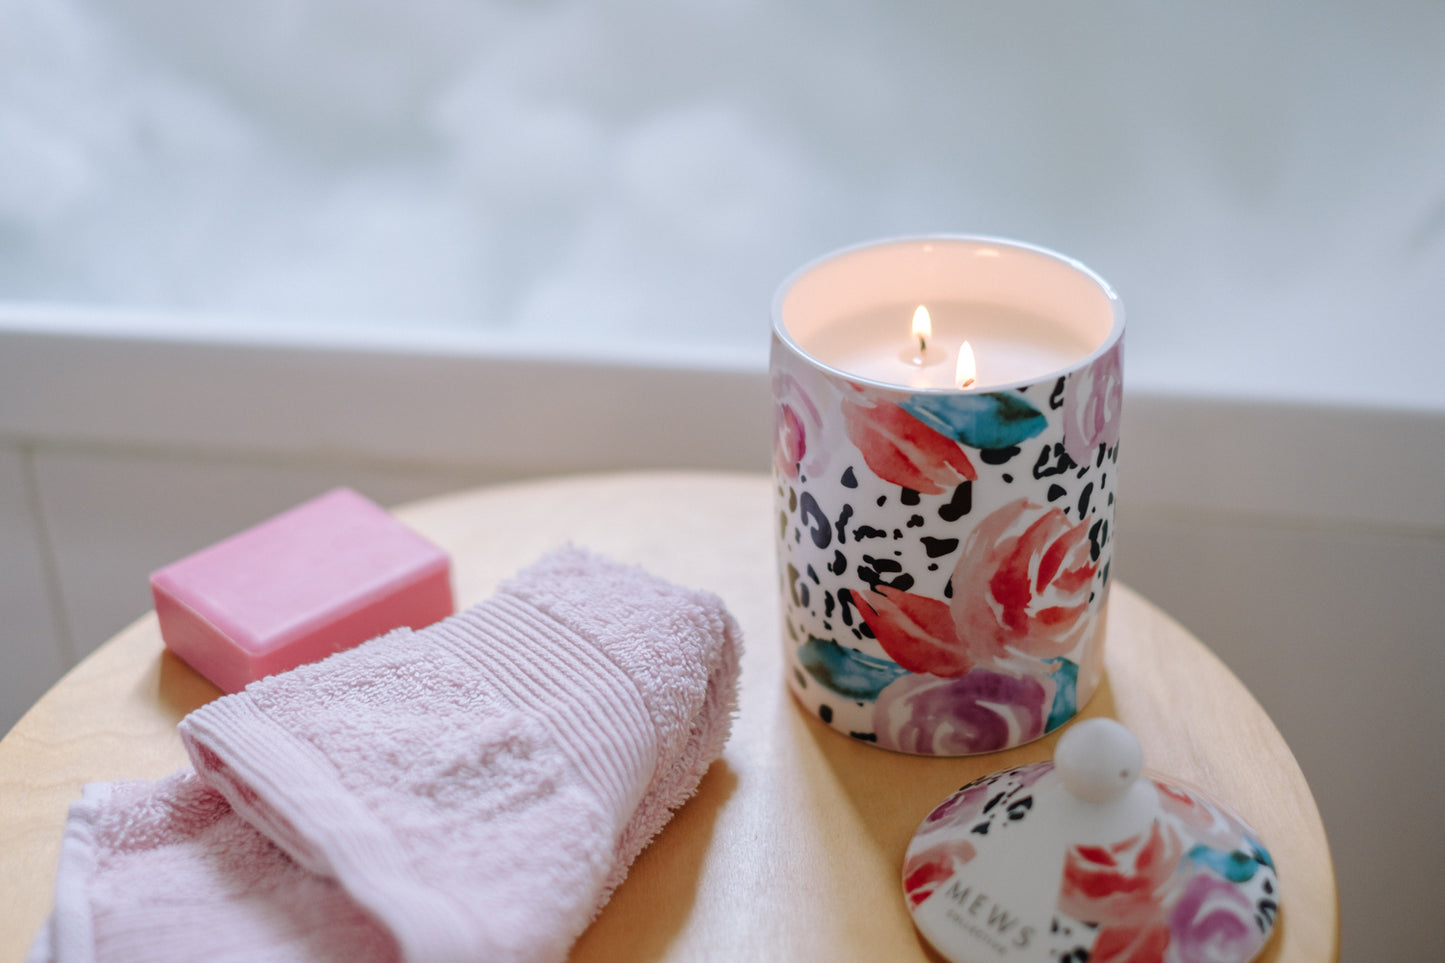 Mews - Blush Peonies Soy Candle 100g